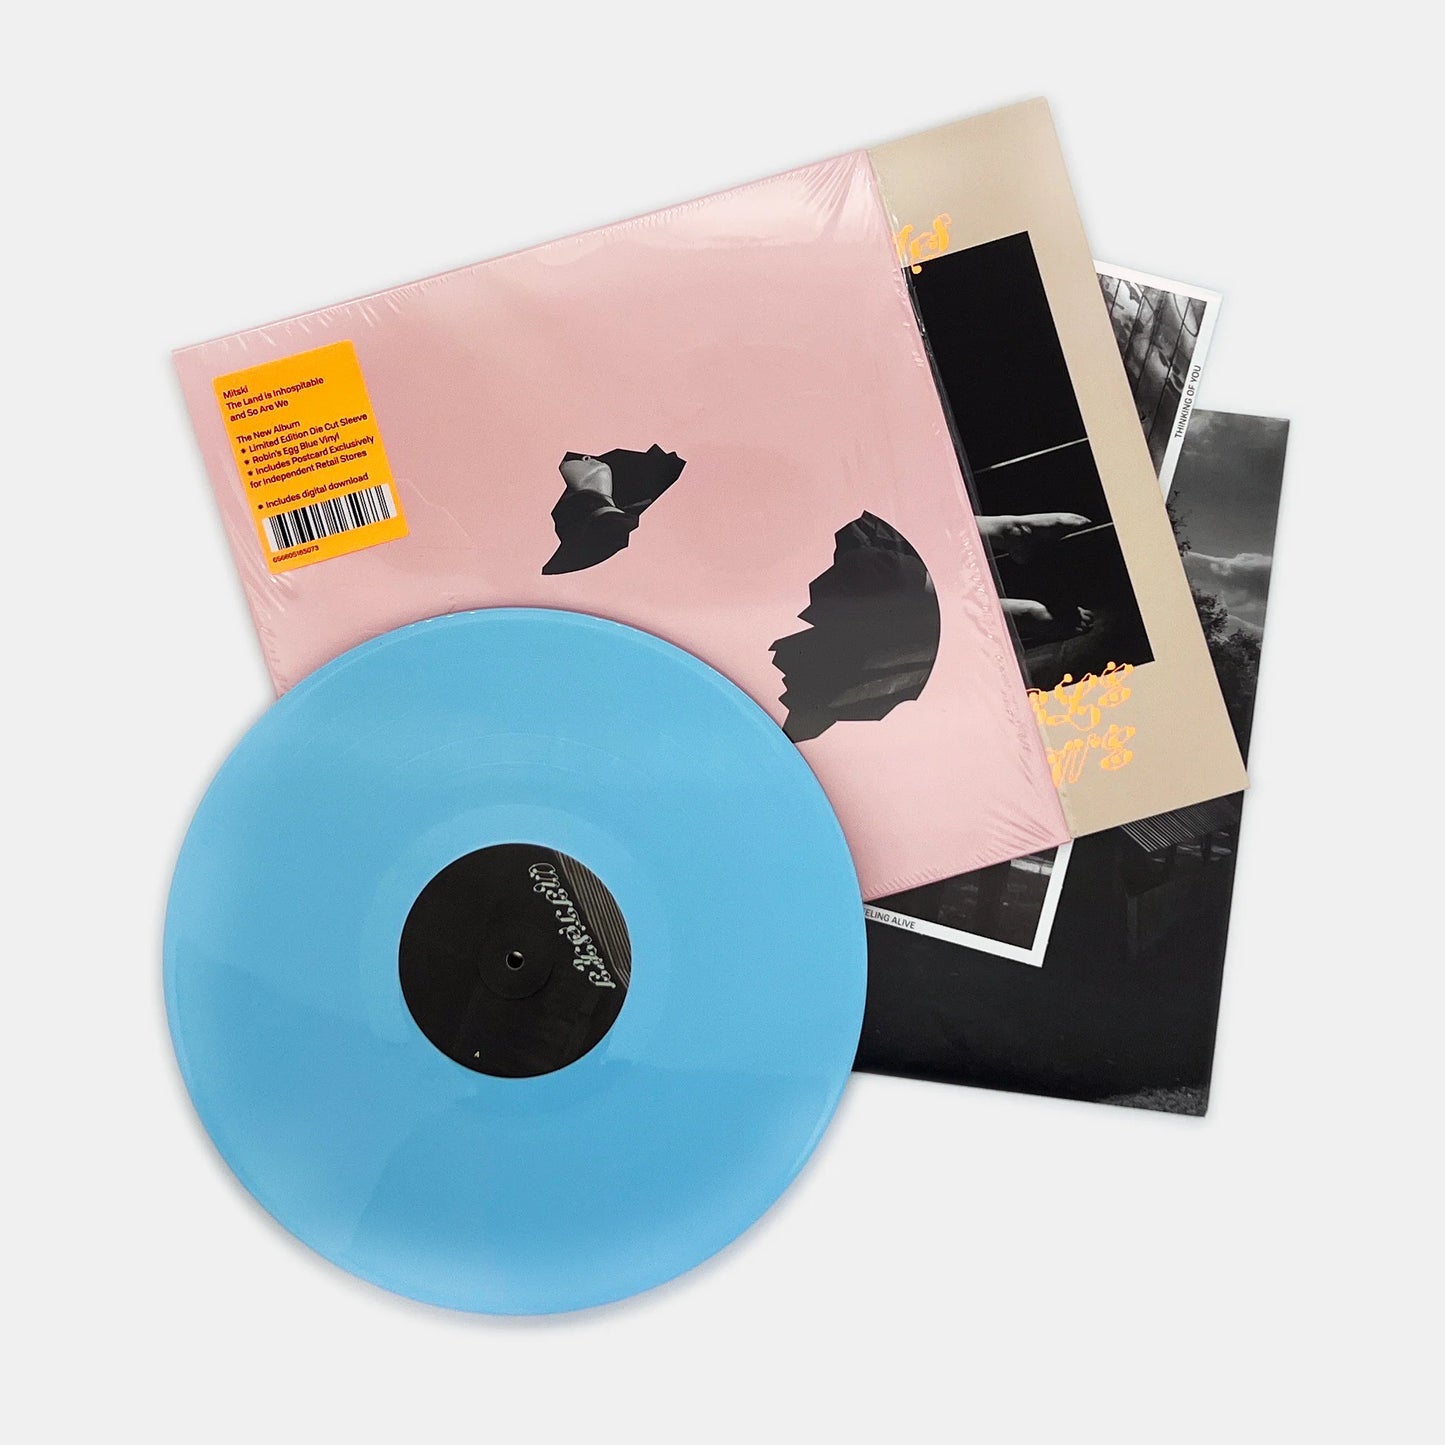 Mitski - The Land Is Inhospitable and So Are We (Limited Edition on Robin Egg Blue w/ Pink Die-Cut)